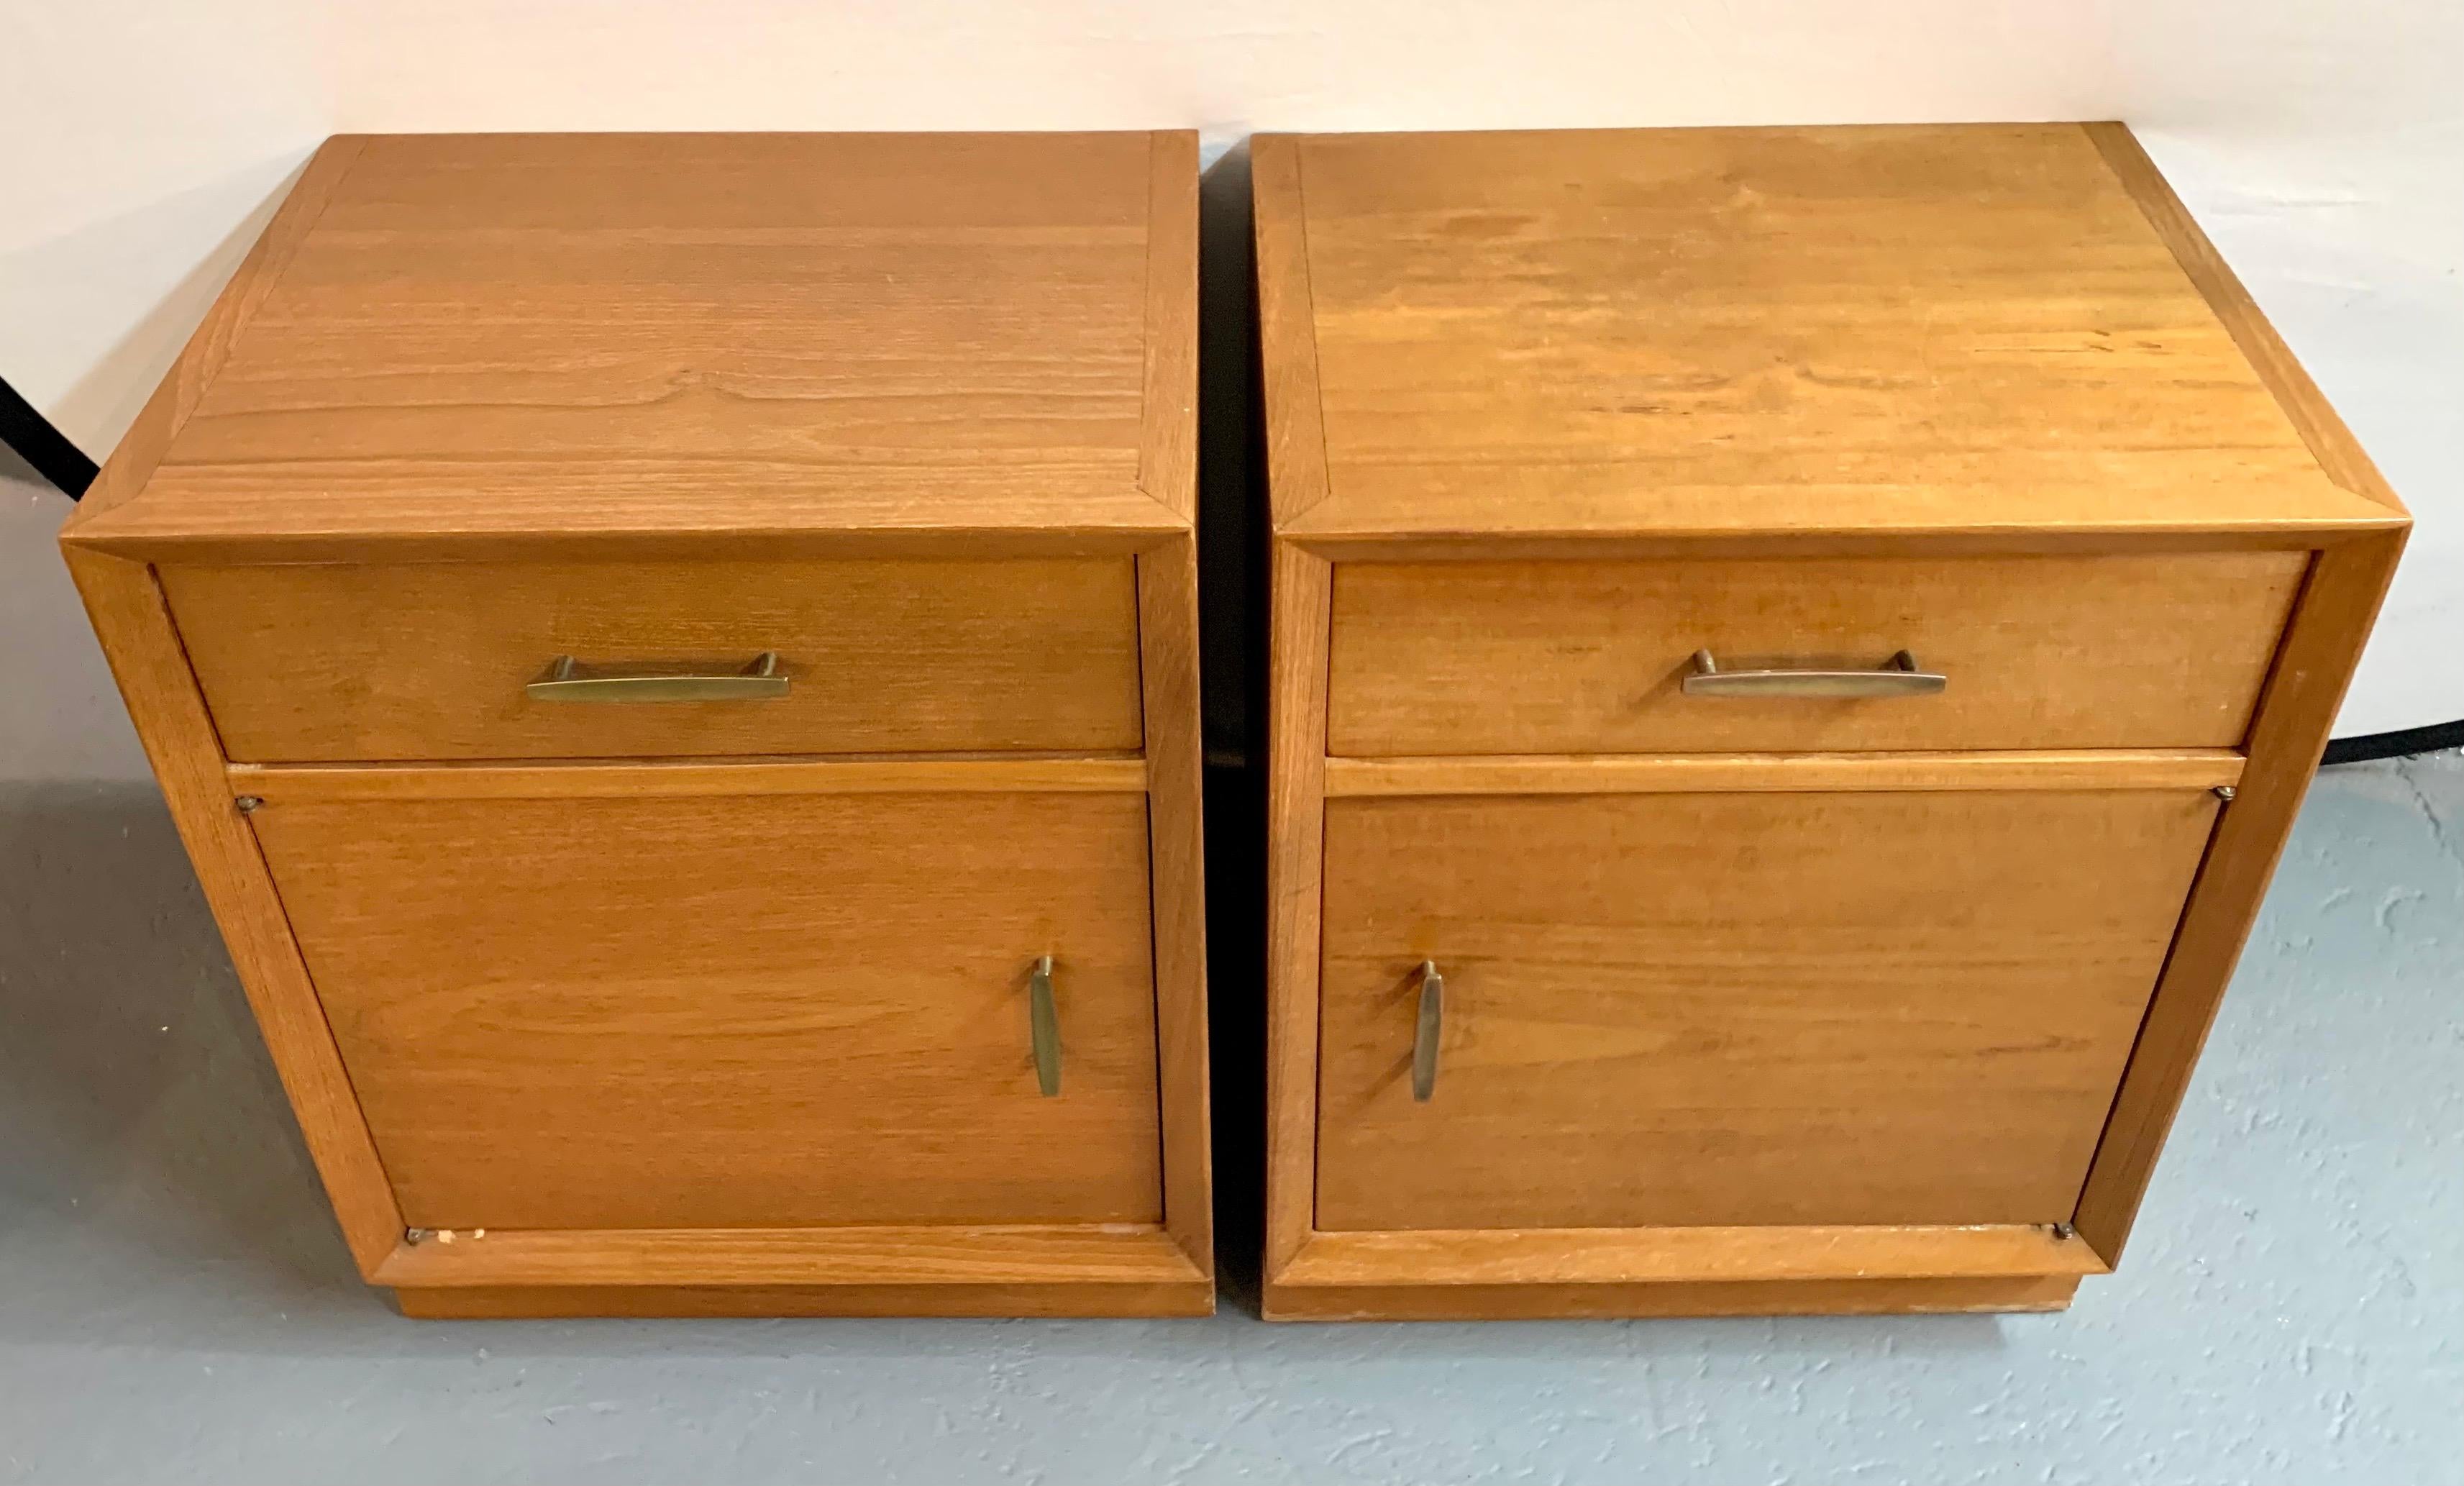 Pair of mid century nightstands with one top drawer and bottom door that opens to store your books, magazines etc.